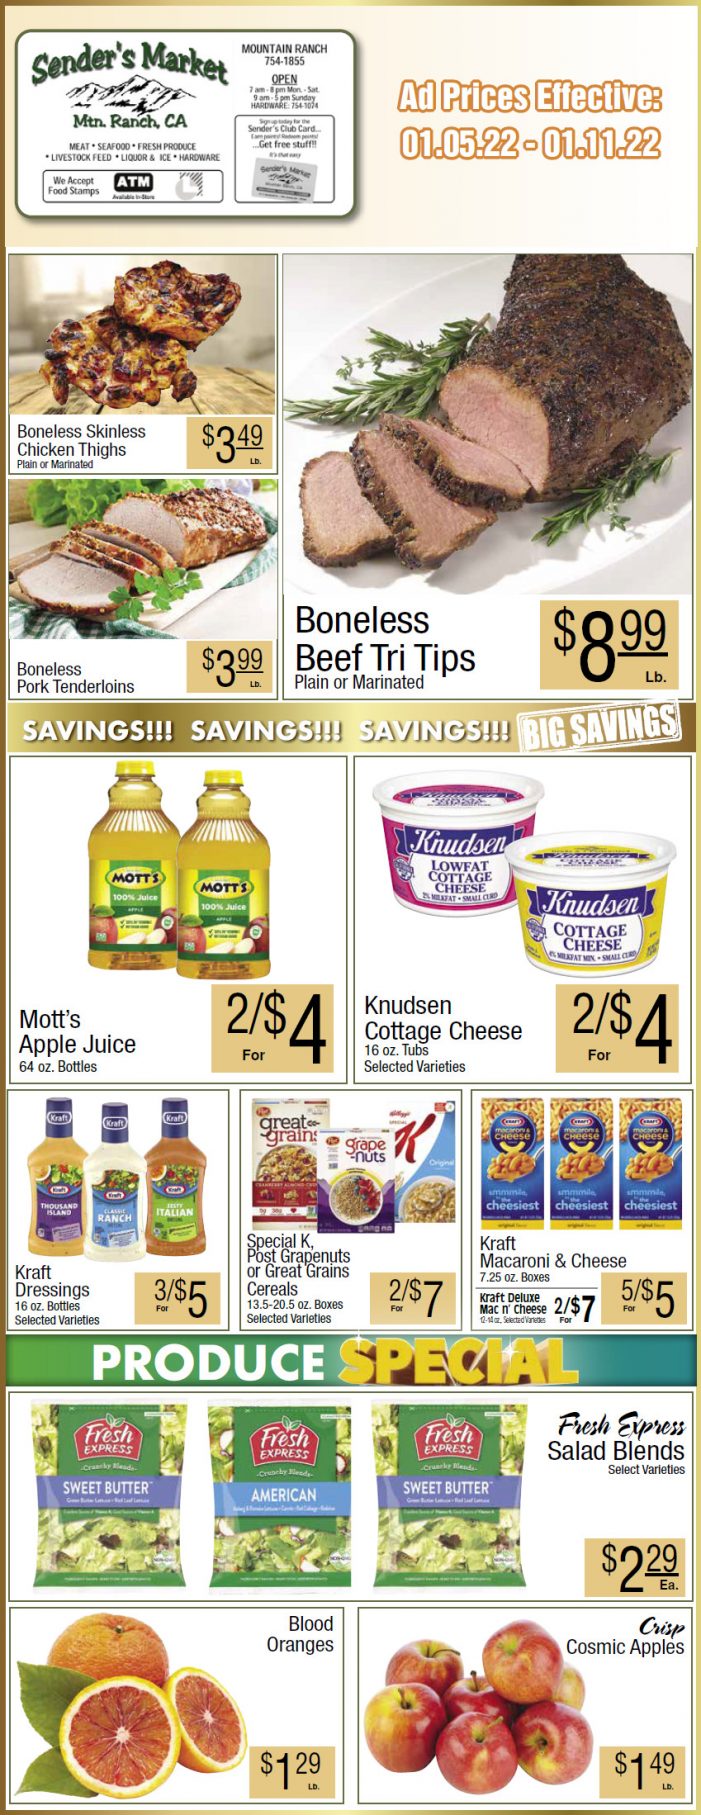 Sender’s Market’s Weekly Ad & Grocery Specials Through January 11th Shop Local & Save!